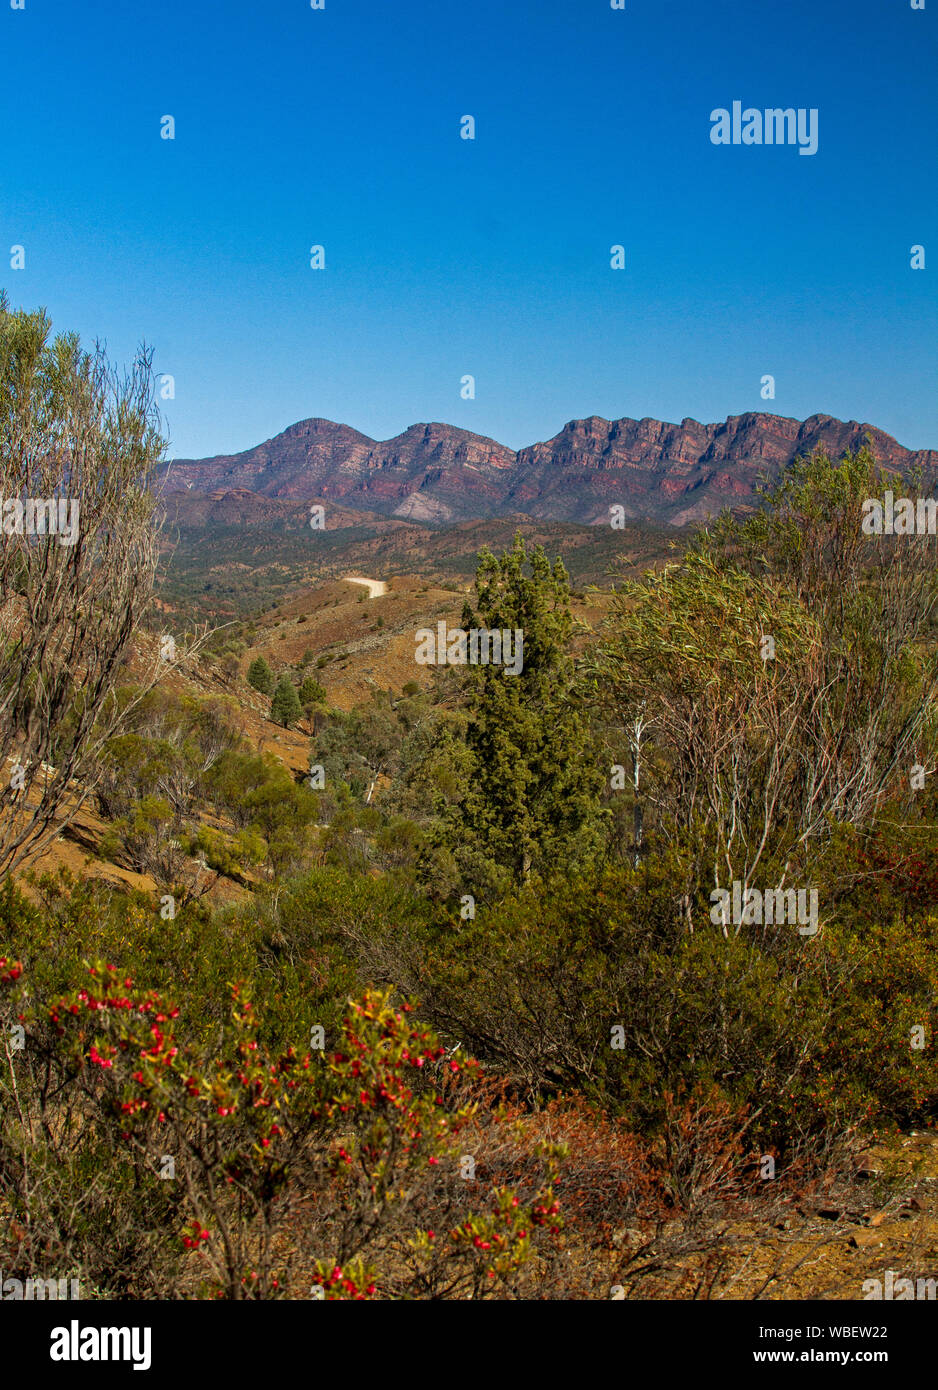 Stunning landscape in Flinders Ranges National Park with rugged red rocky ranges reaching up into blue sky , South Australia Stock Photo